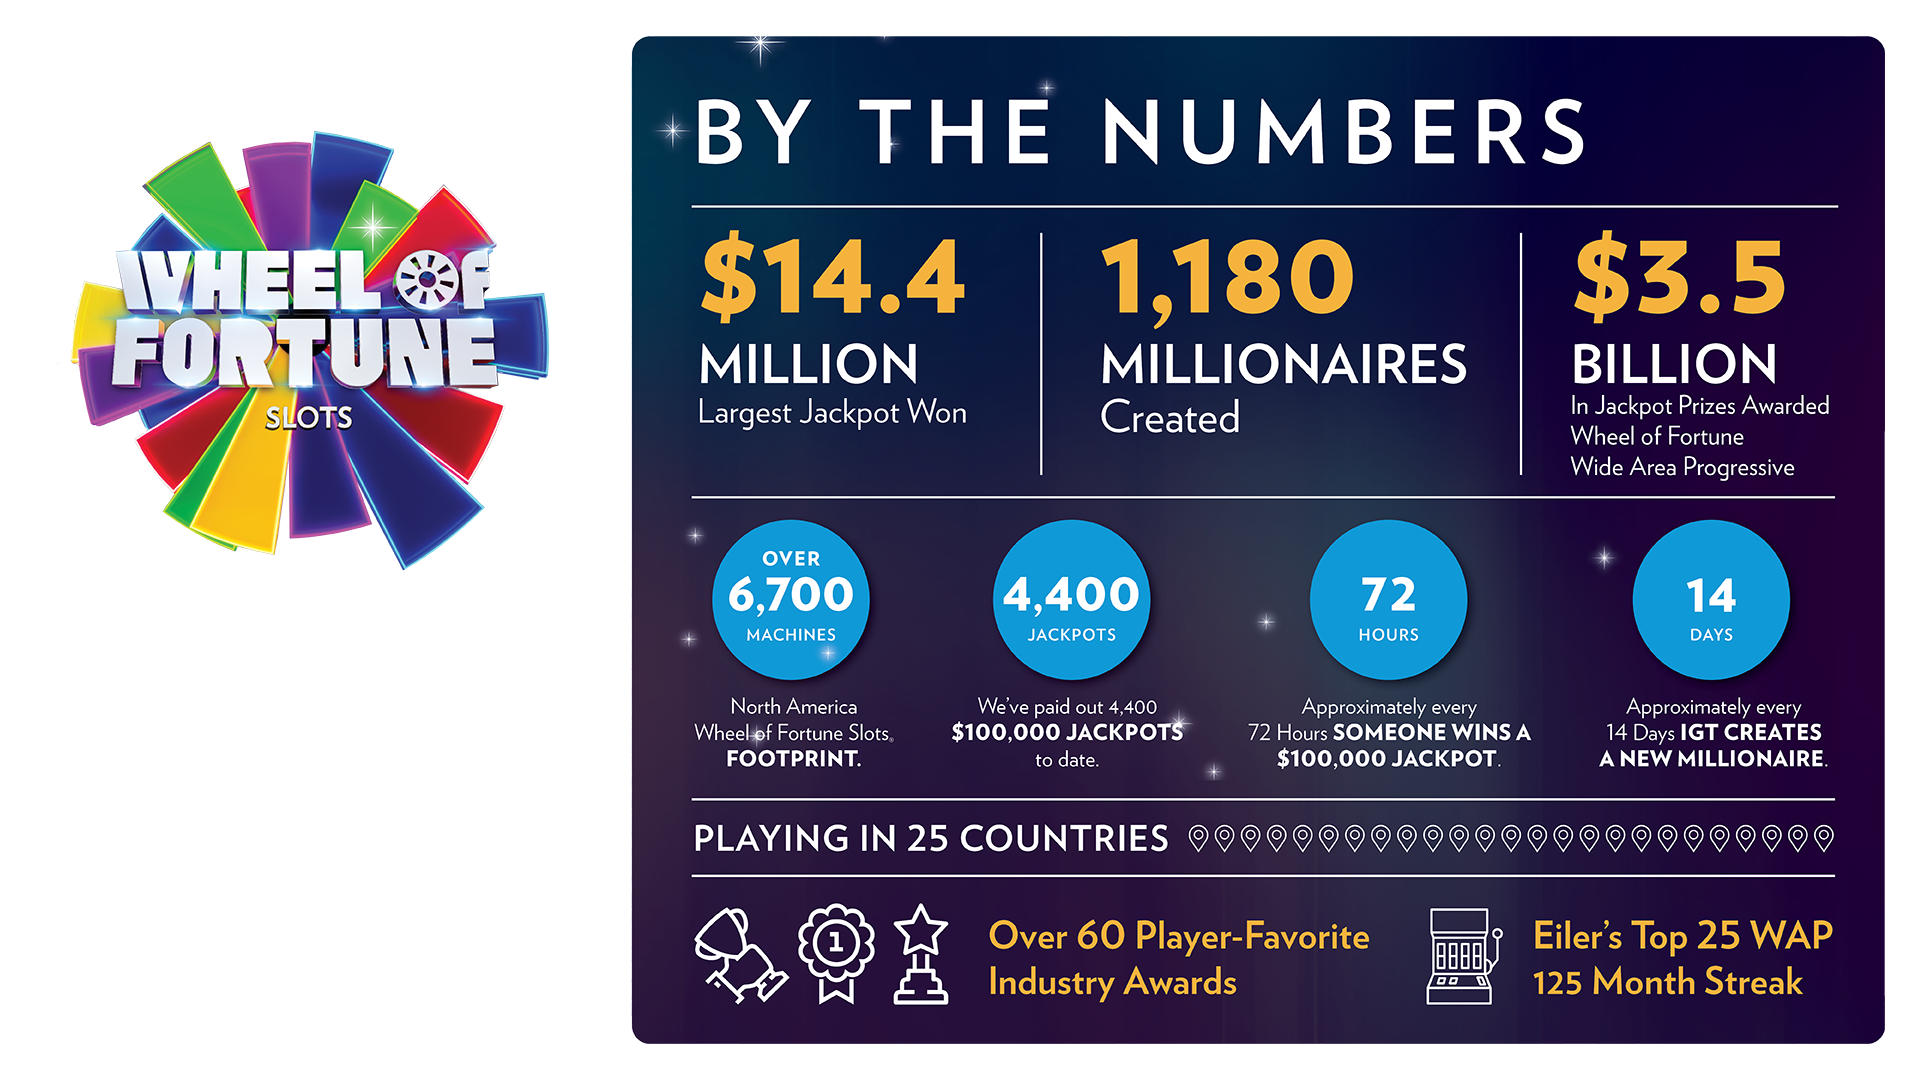 Wheel of Fortune Slots by the numbers. $14.4 Million largest jackpot win. 1180 millionaires created. $3.5 Billion in Jackpot Pirzes awarded Wheel of Fortune Wide Area Progressives, over 7500 machines North America Wheel of Fortune Slots Footprint. 4,400 jackpots. 4300 $100000 jackpots to date. Approximately every 72 hours someone wins a $100000 jackpot. Approximately every 14 days, IGT creates a new millionaire. Playing in 25 countries. Over 60 player favorite industry awards. Eiler's top 25 WAP 125 month streak. 